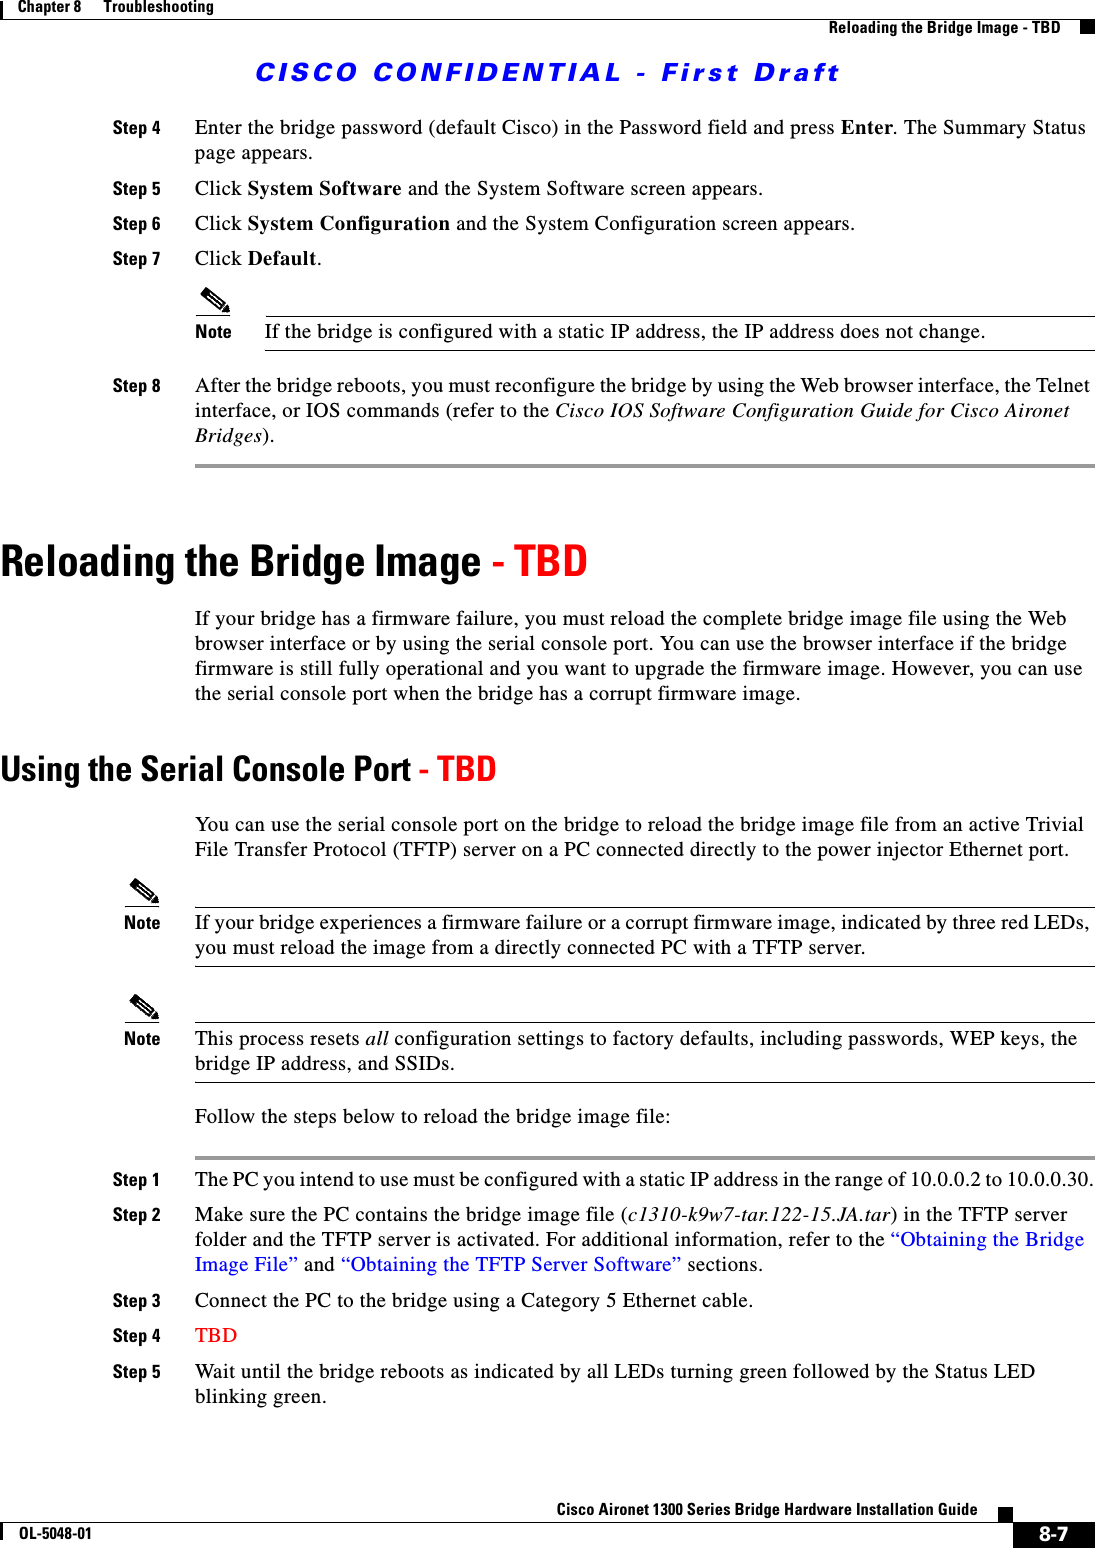 CISCO CONFIDENTIAL - First Draft8-7Cisco Aironet 1300 Series Bridge Hardware Installation GuideOL-5048-01Chapter 8      TroubleshootingReloading the Bridge Image - TBDStep 4 Enter the bridge password (default Cisco) in the Password field and press Enter. The Summary Status page appears.Step 5 Click System Software and the System Software screen appears.Step 6 Click System Configuration and the System Configuration screen appears.Step 7 Click Default.Note If the bridge is configured with a static IP address, the IP address does not change.Step 8 After the bridge reboots, you must reconfigure the bridge by using the Web browser interface, the Telnet interface, or IOS commands (refer to the Cisco IOS Software Configuration Guide for Cisco Aironet Bridges).Reloading the Bridge Image - TBDIf your bridge has a firmware failure, you must reload the complete bridge image file using the Web browser interface or by using the serial console port. You can use the browser interface if the bridge firmware is still fully operational and you want to upgrade the firmware image. However, you can use the serial console port when the bridge has a corrupt firmware image. Using the Serial Console Port - TBDYou can use the serial console port on the bridge to reload the bridge image file from an active Trivial File Transfer Protocol (TFTP) server on a PC connected directly to the power injector Ethernet port. Note If your bridge experiences a firmware failure or a corrupt firmware image, indicated by three red LEDs, you must reload the image from a directly connected PC with a TFTP server.Note This process resets all configuration settings to factory defaults, including passwords, WEP keys, the bridge IP address, and SSIDs. Follow the steps below to reload the bridge image file:Step 1 The PC you intend to use must be configured with a static IP address in the range of 10.0.0.2 to 10.0.0.30.Step 2 Make sure the PC contains the bridge image file (c1310-k9w7-tar.122-15.JA.tar) in the TFTP server folder and the TFTP server is activated. For additional information, refer to the “Obtaining the Bridge Image File” and “Obtaining the TFTP Server Software” sections. Step 3 Connect the PC to the bridge using a Category 5 Ethernet cable.Step 4 TBDStep 5 Wait until the bridge reboots as indicated by all LEDs turning green followed by the Status LED blinking green.